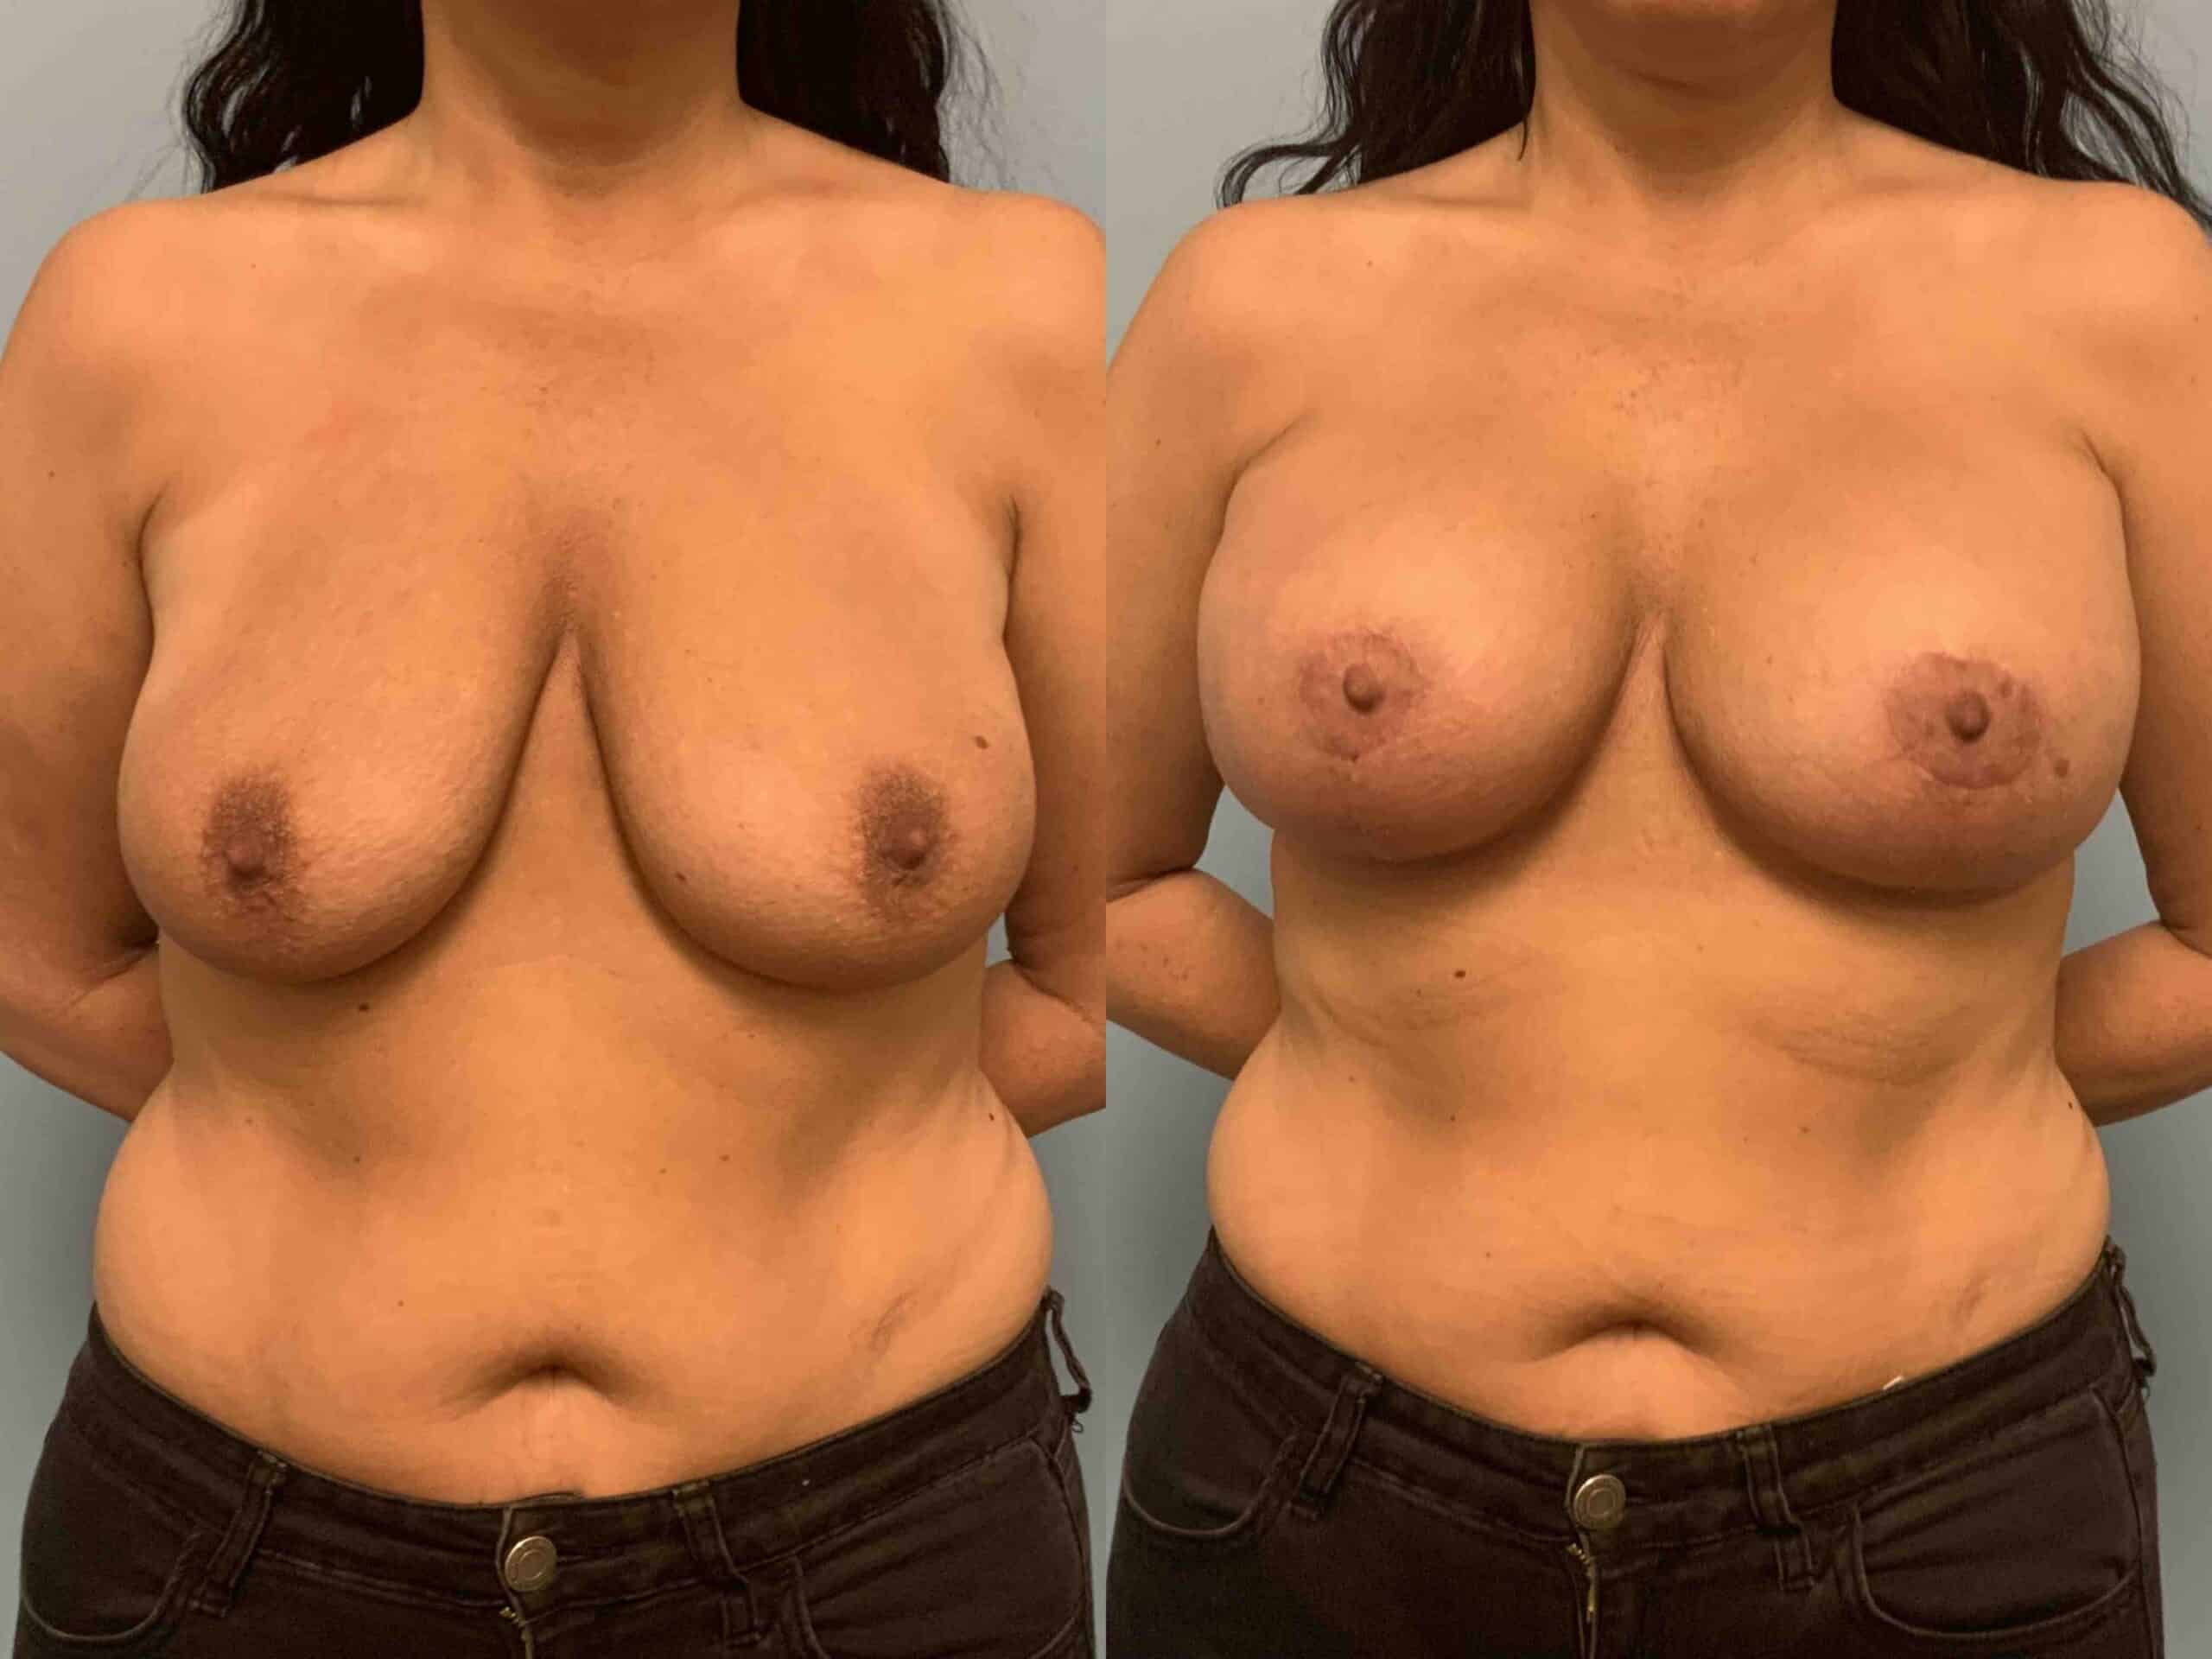 Before and after, 1 mo post op from Breast Lift/Mastopexy, Breast Augmentation, Axillary Roll Resection (front view)